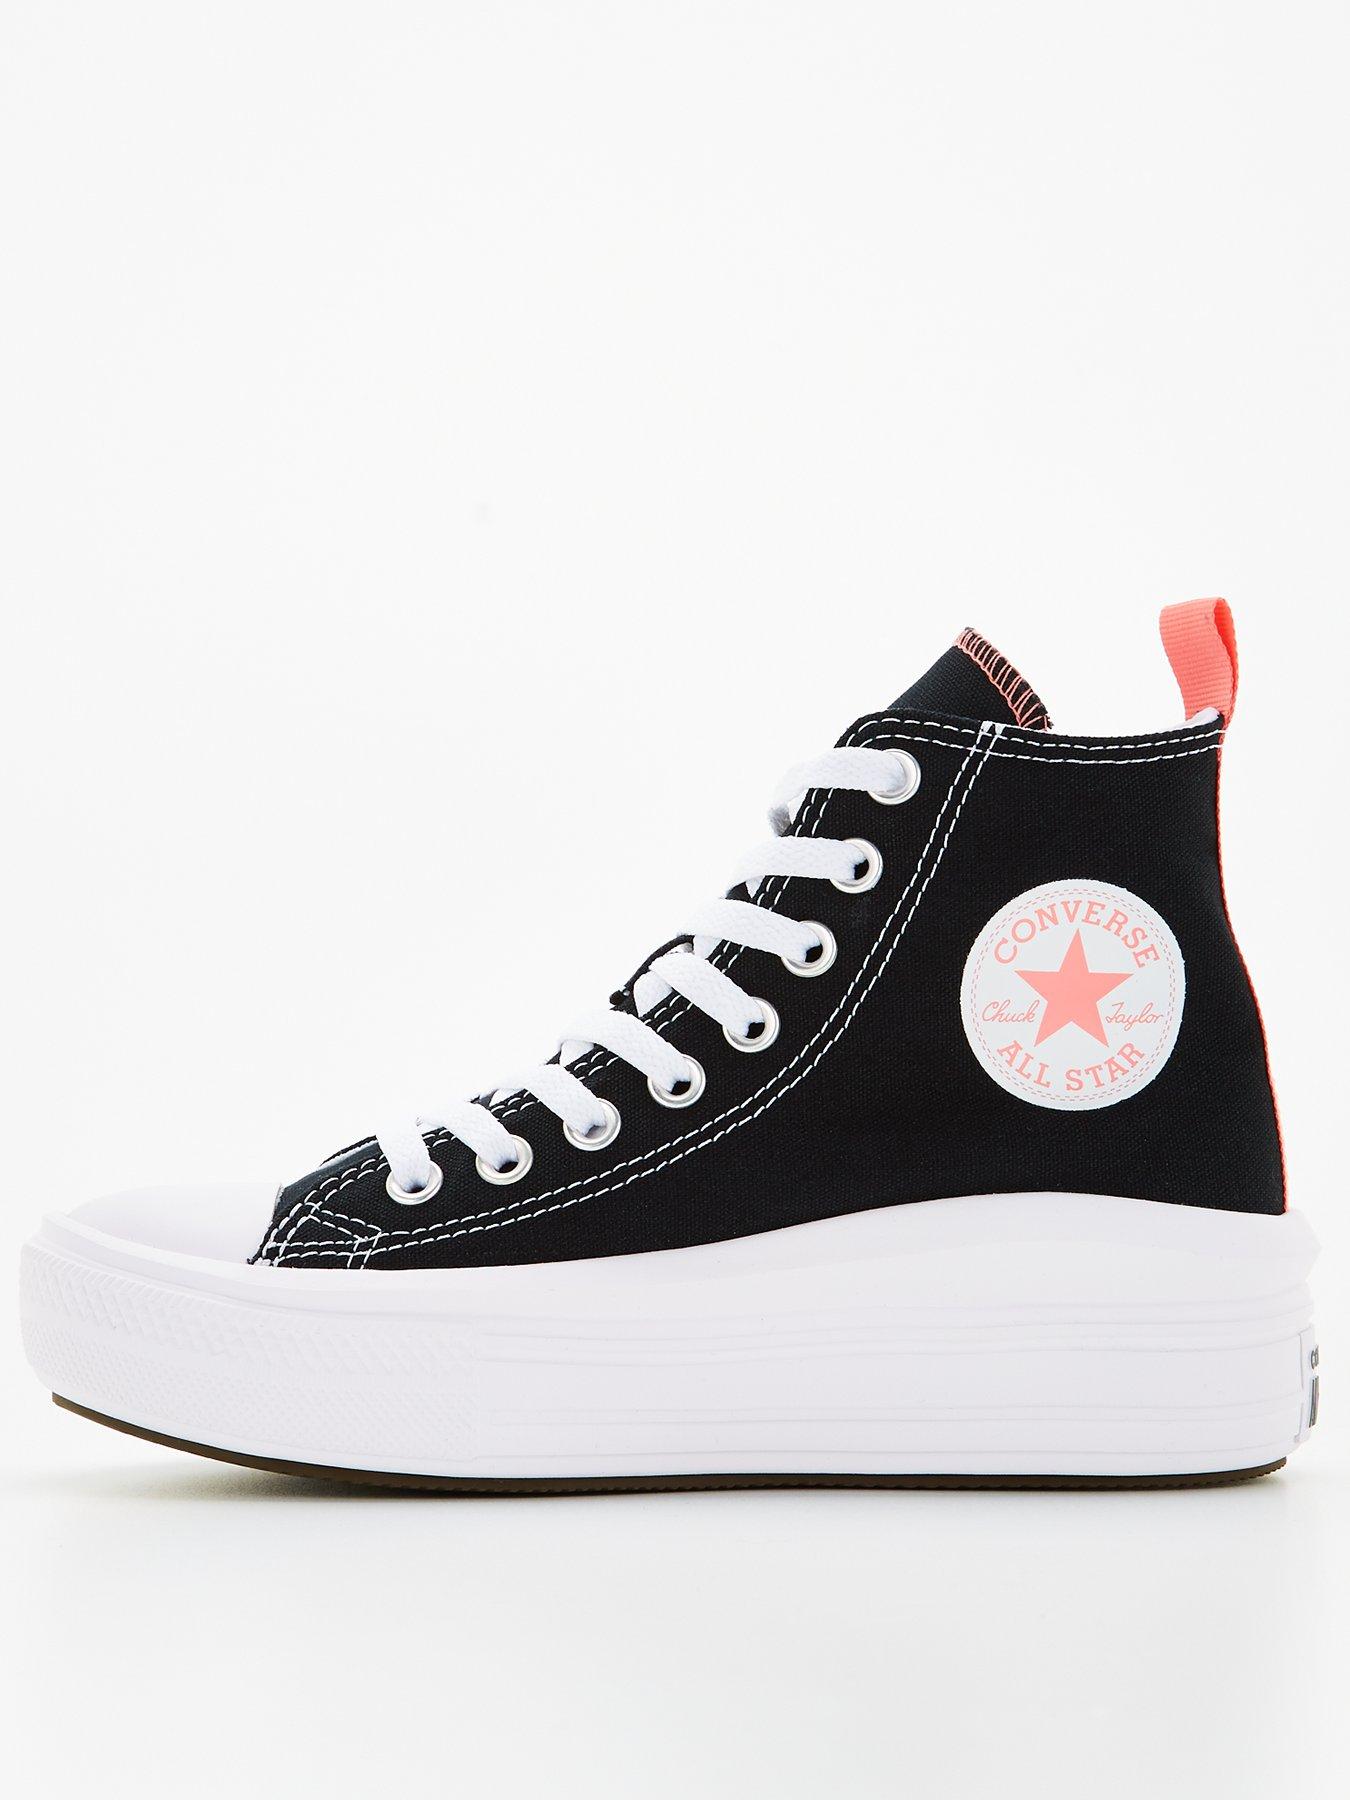 Top 60+ images converse black and white all star hi trainers - In ...